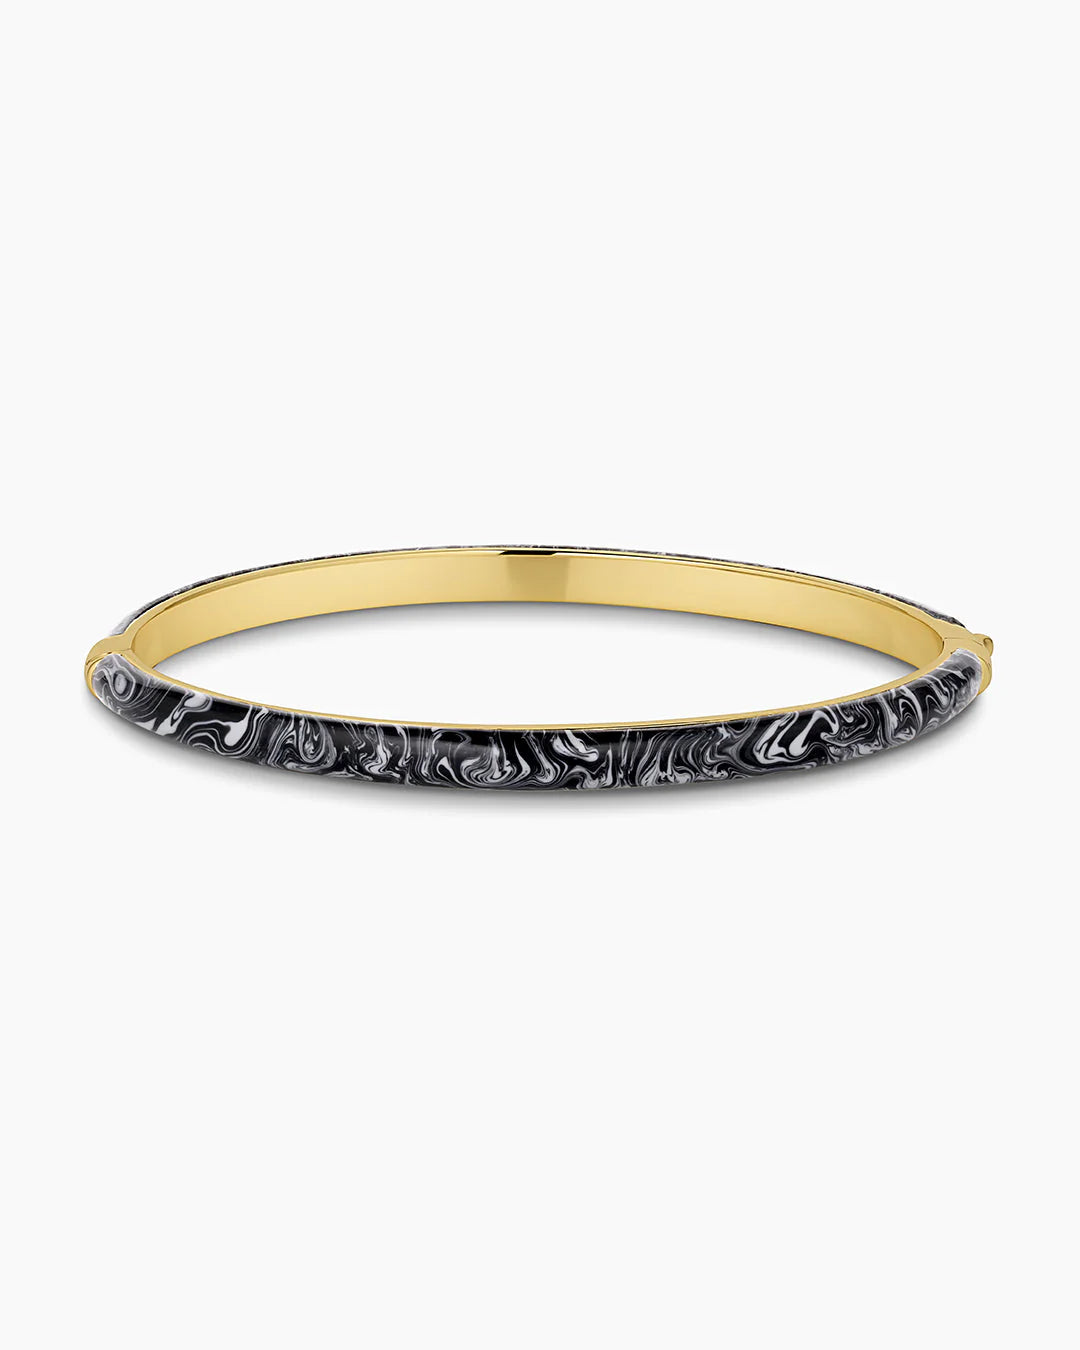 Paseo Marble Cuff - Black Marble | Collective Request 